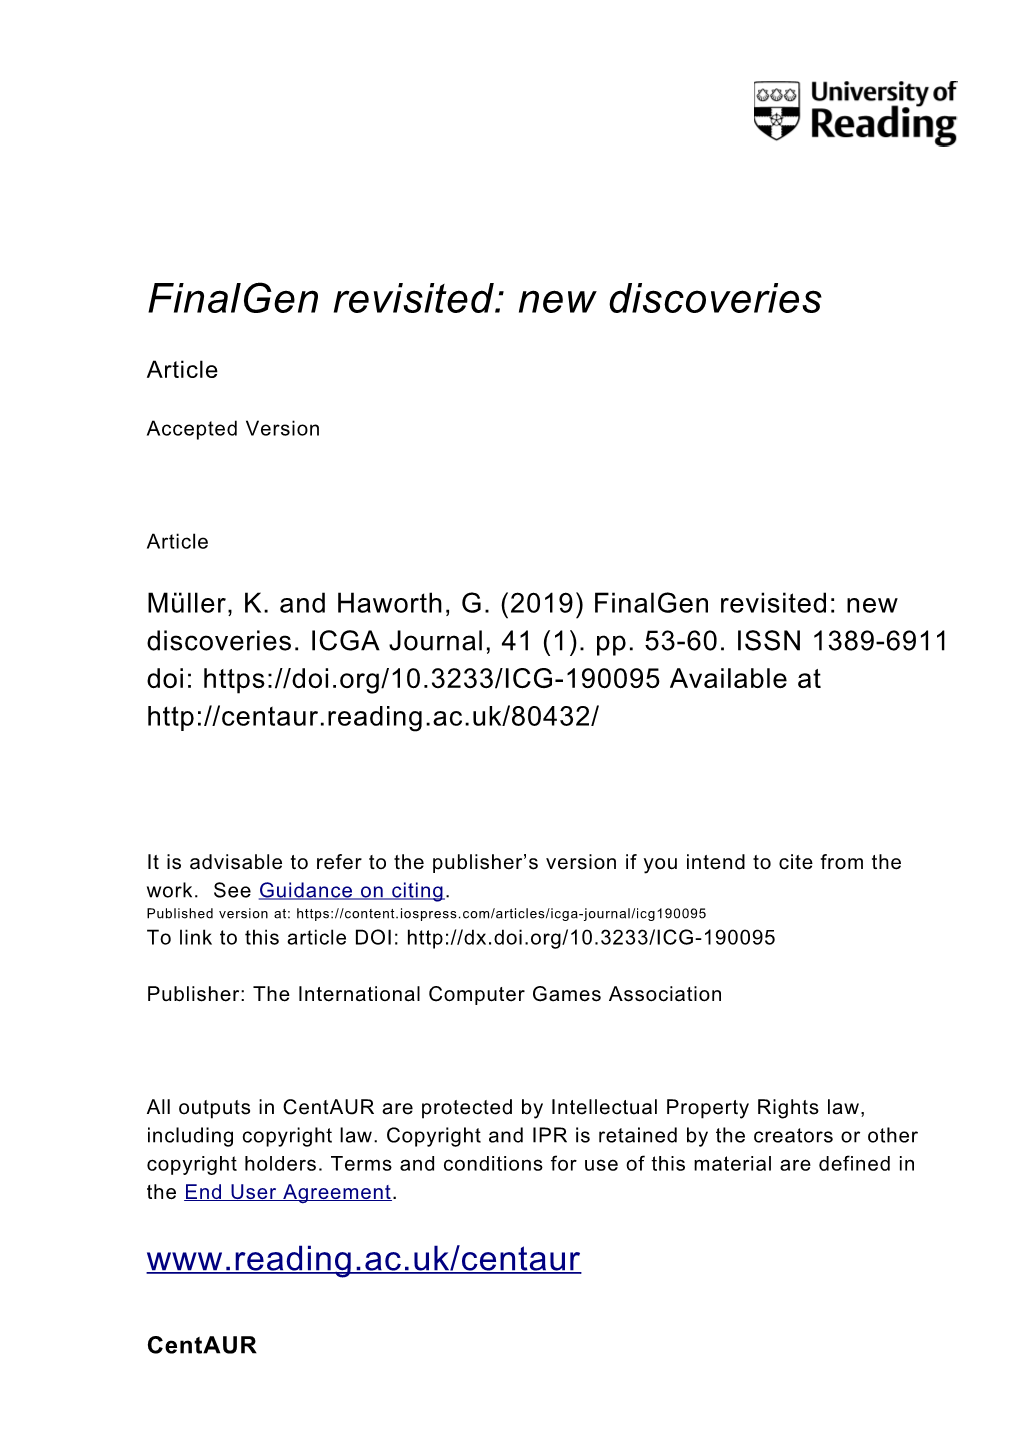 Finalgen Revisited: New Discoveries